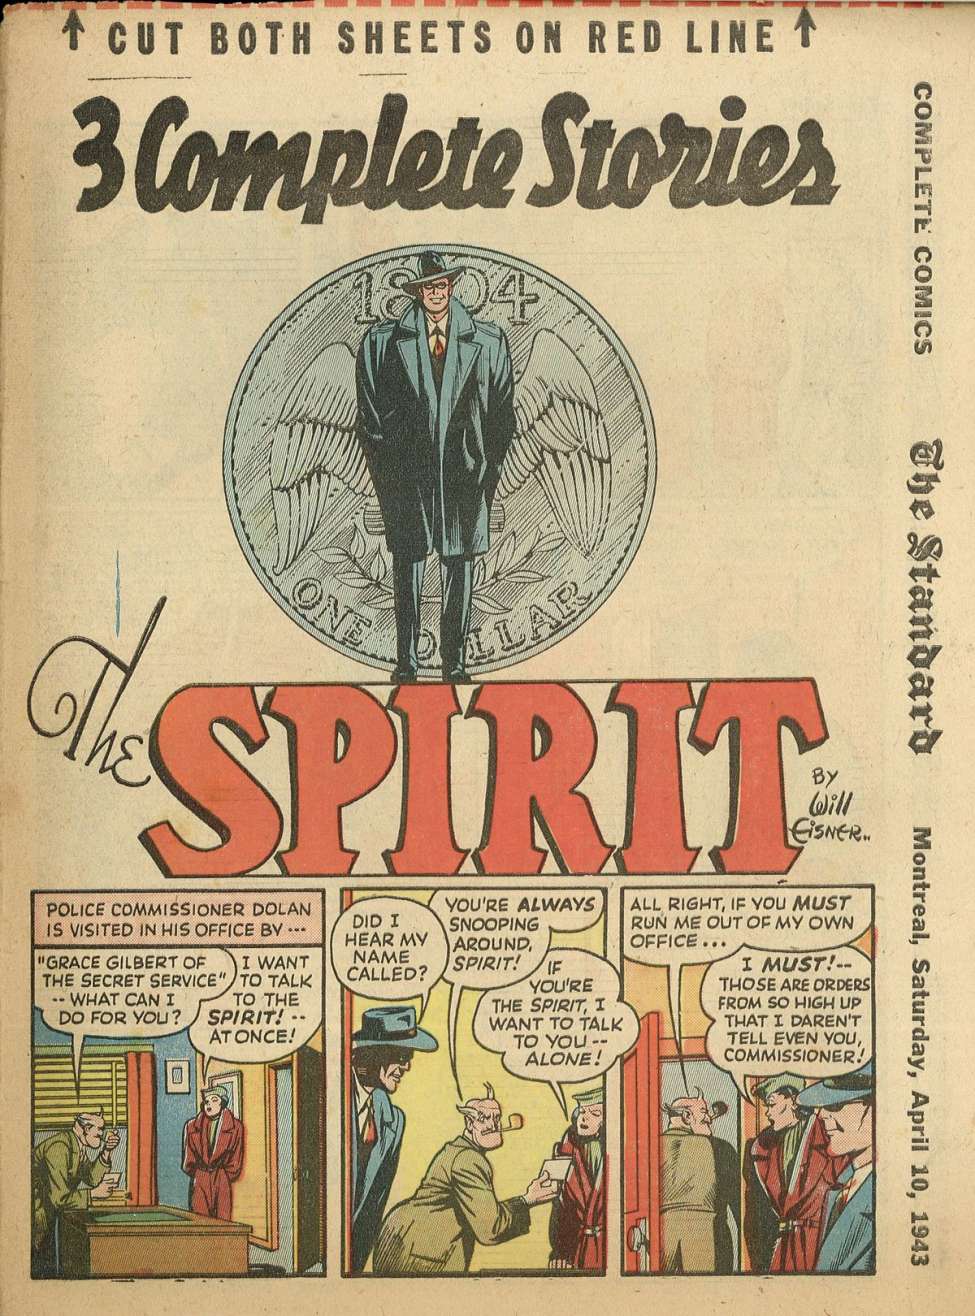 Comic Book Cover For The Spirit (1943-04-10) - Montreal Standard